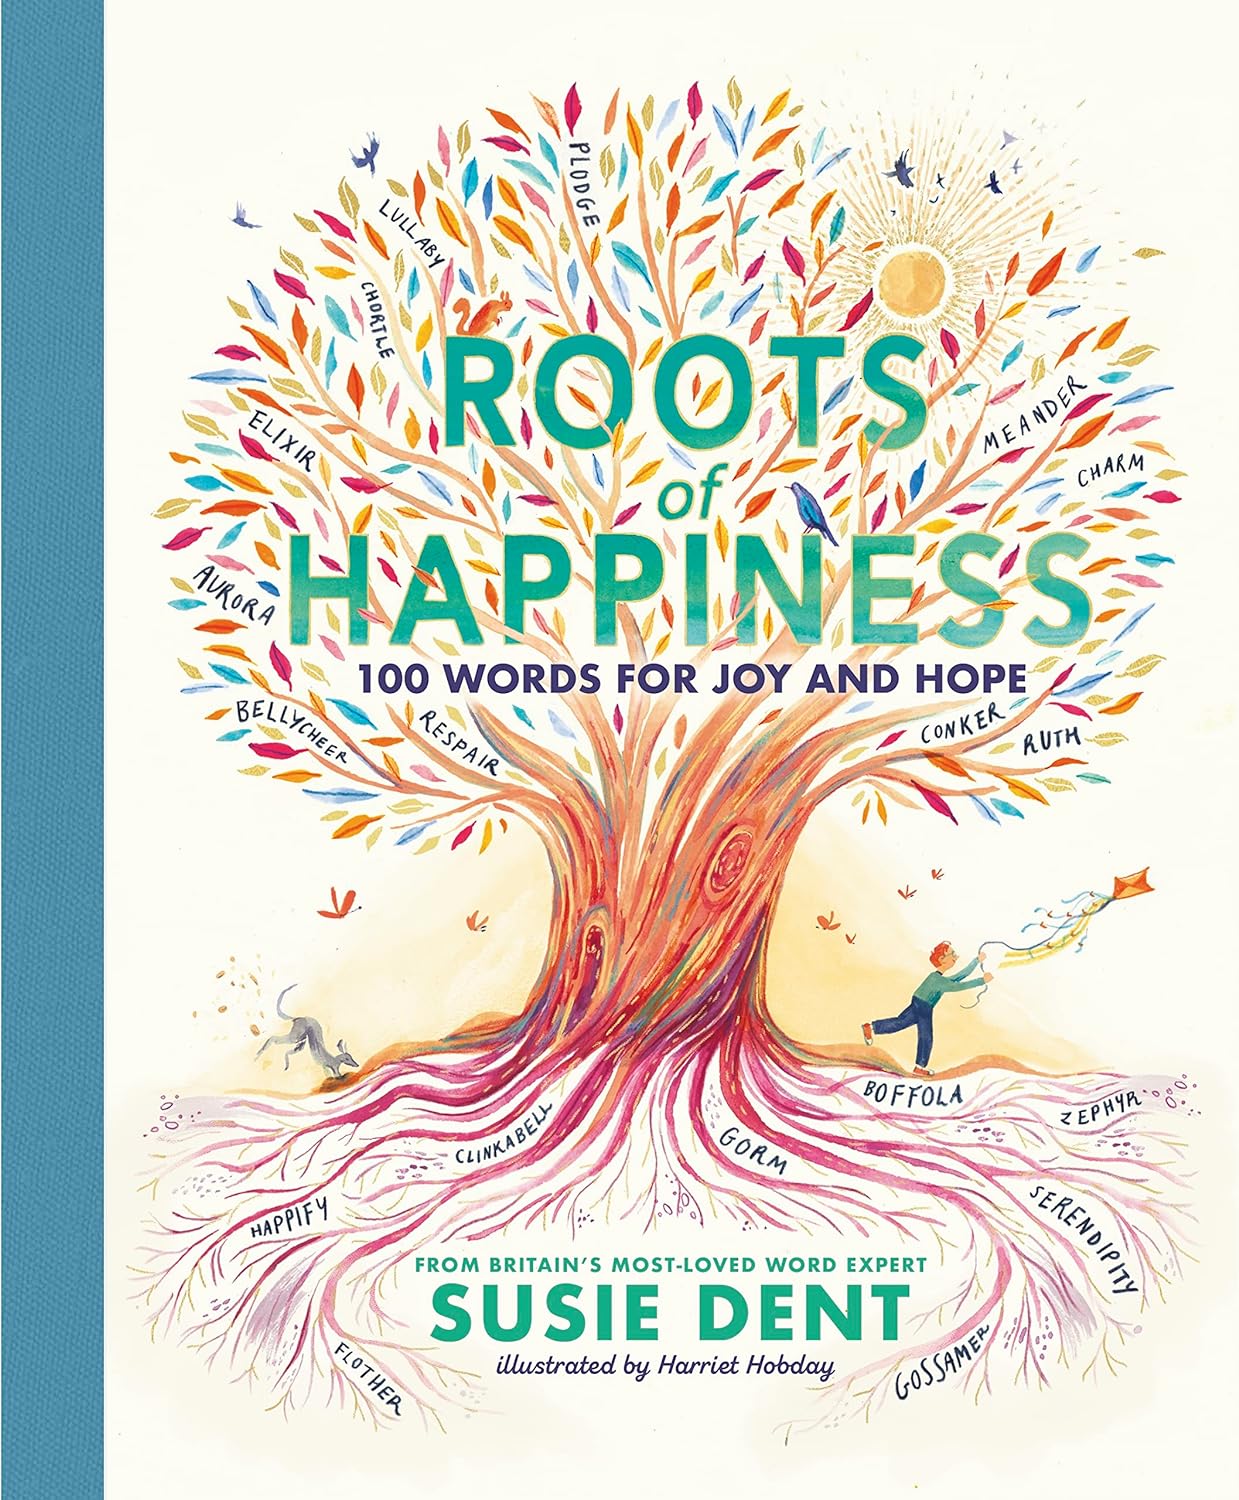 ROOTS OF HAPPINESS: 100 WORDS FOR JOY AND HOPE FROM BRITAIN’S MOST-LOVED WORD EXPERT (HC)